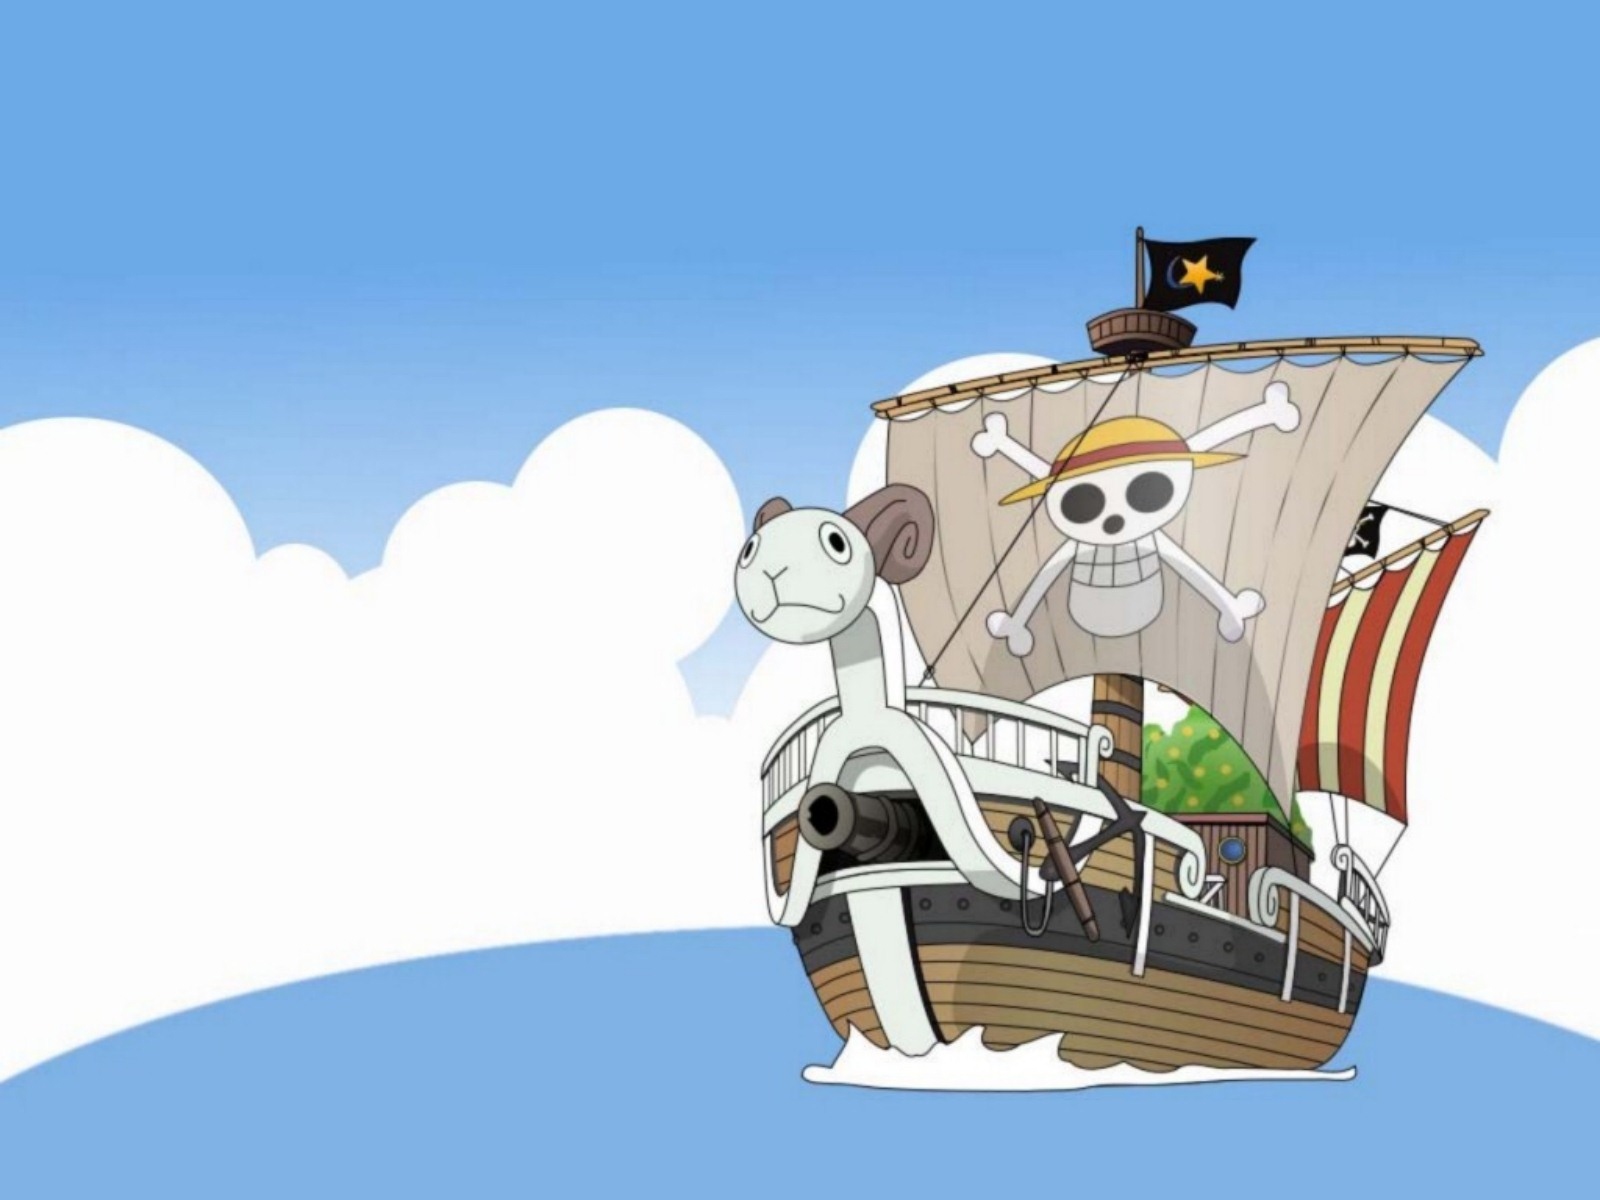 Mandriva Pirate Ship Wallpaper Linux ictures with Pirates 